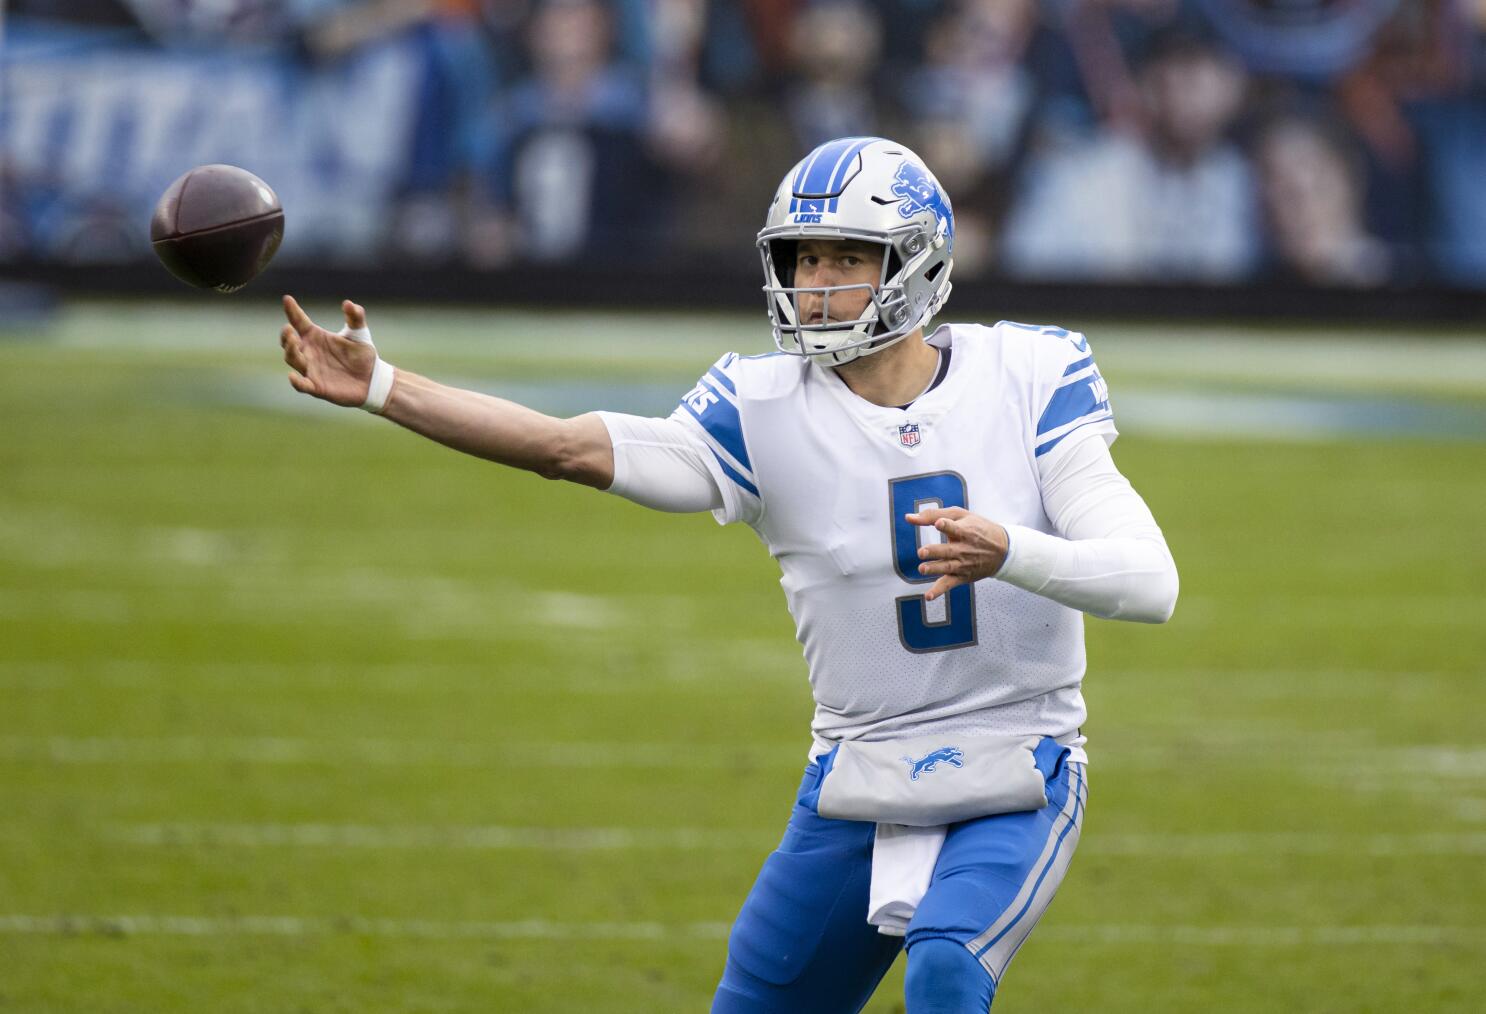 AP sources: Lions trade Stafford to LA for Goff, draft picks - The